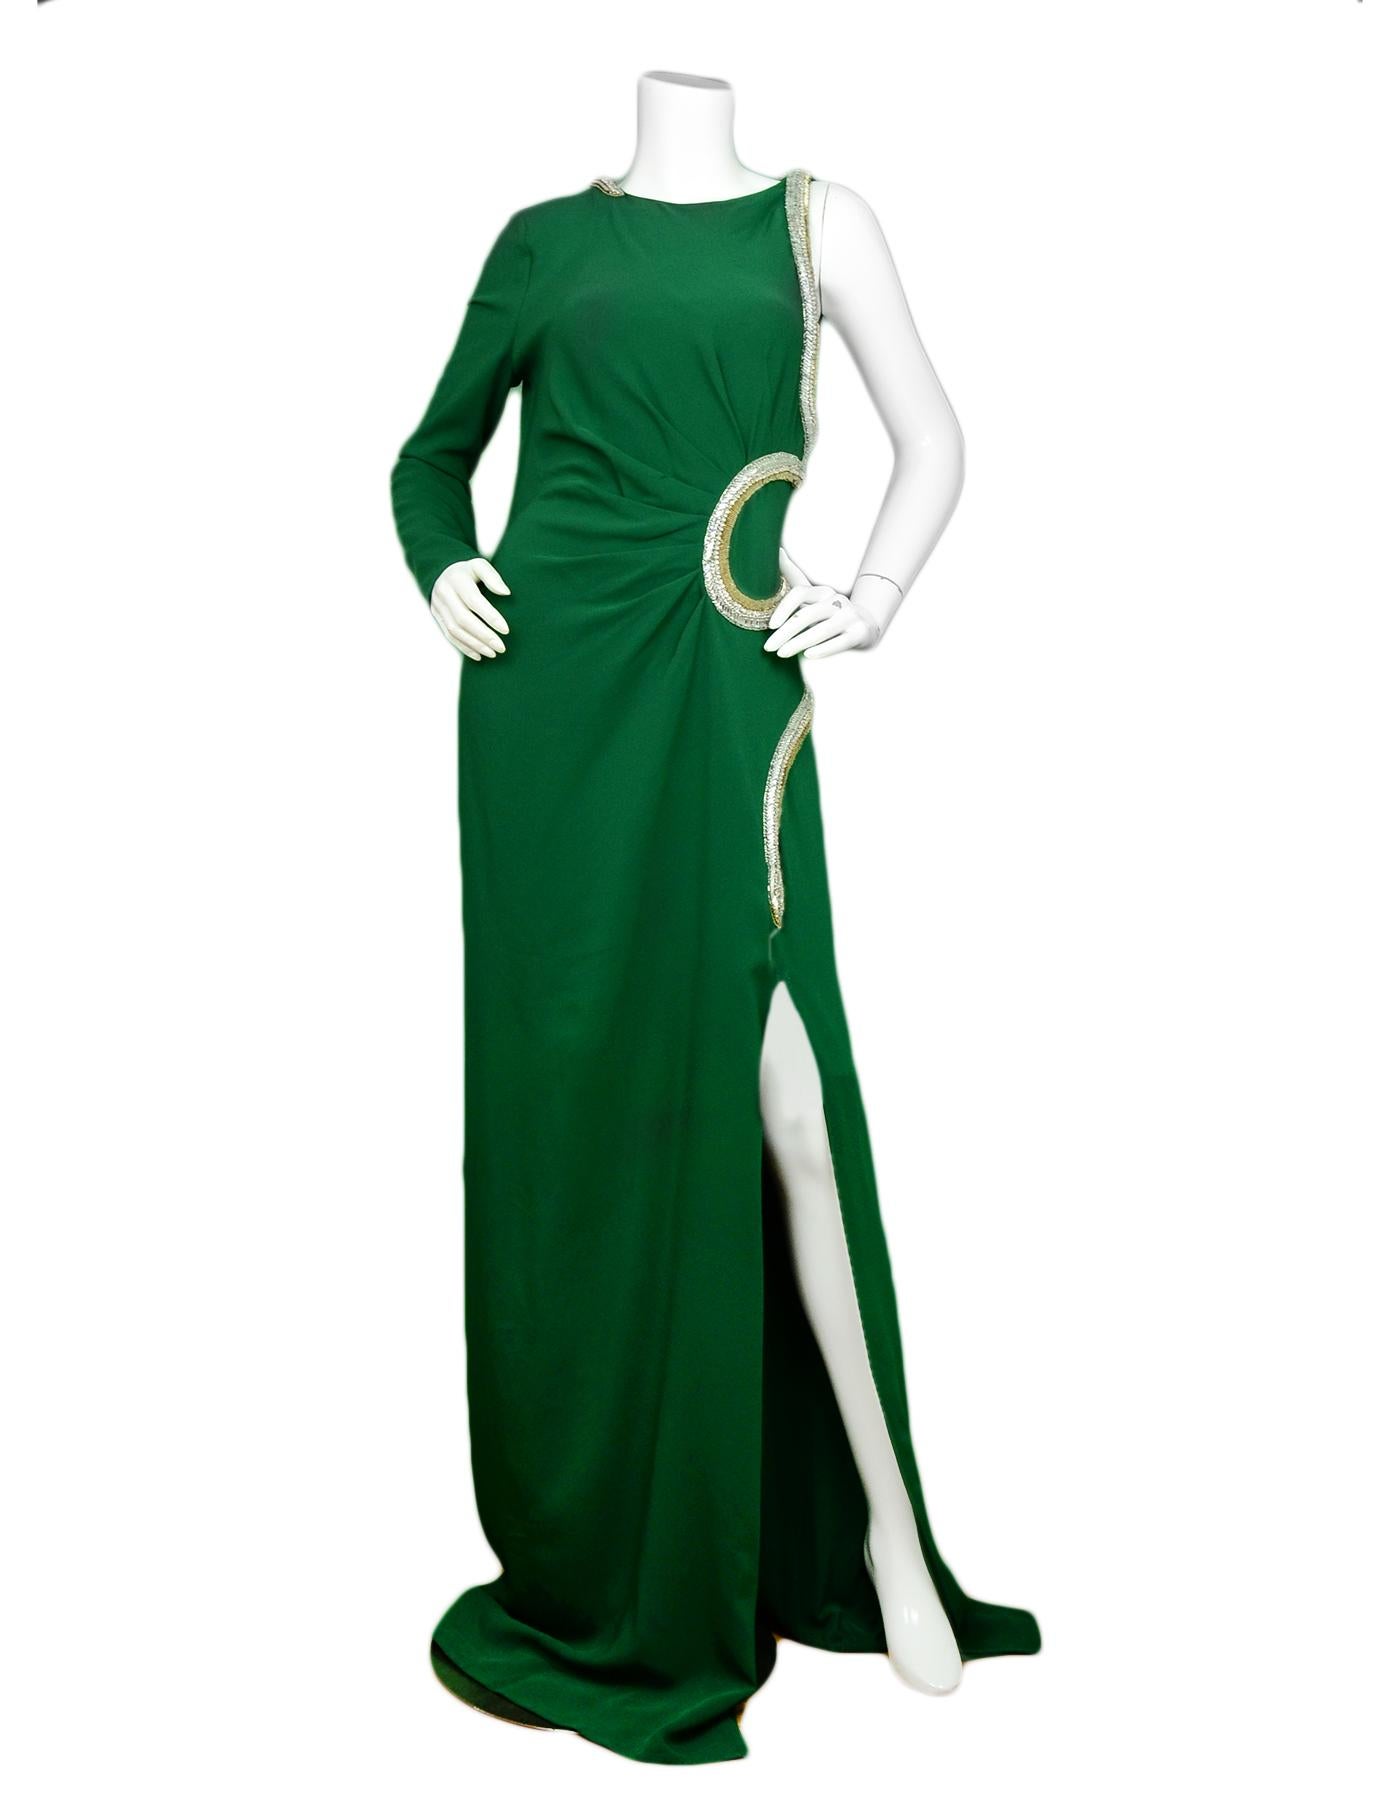 Roberto Cavalli Green Asymmetric Gown w/ Embellished Snake Detail sz 10

Made In: Italy
Color: Green
Materials: Silk, cotton
Lining: Silk, cotton
Opening/Closure: Back zipper
Overall Condition: Excellent pre-owned condition, with the exception of a